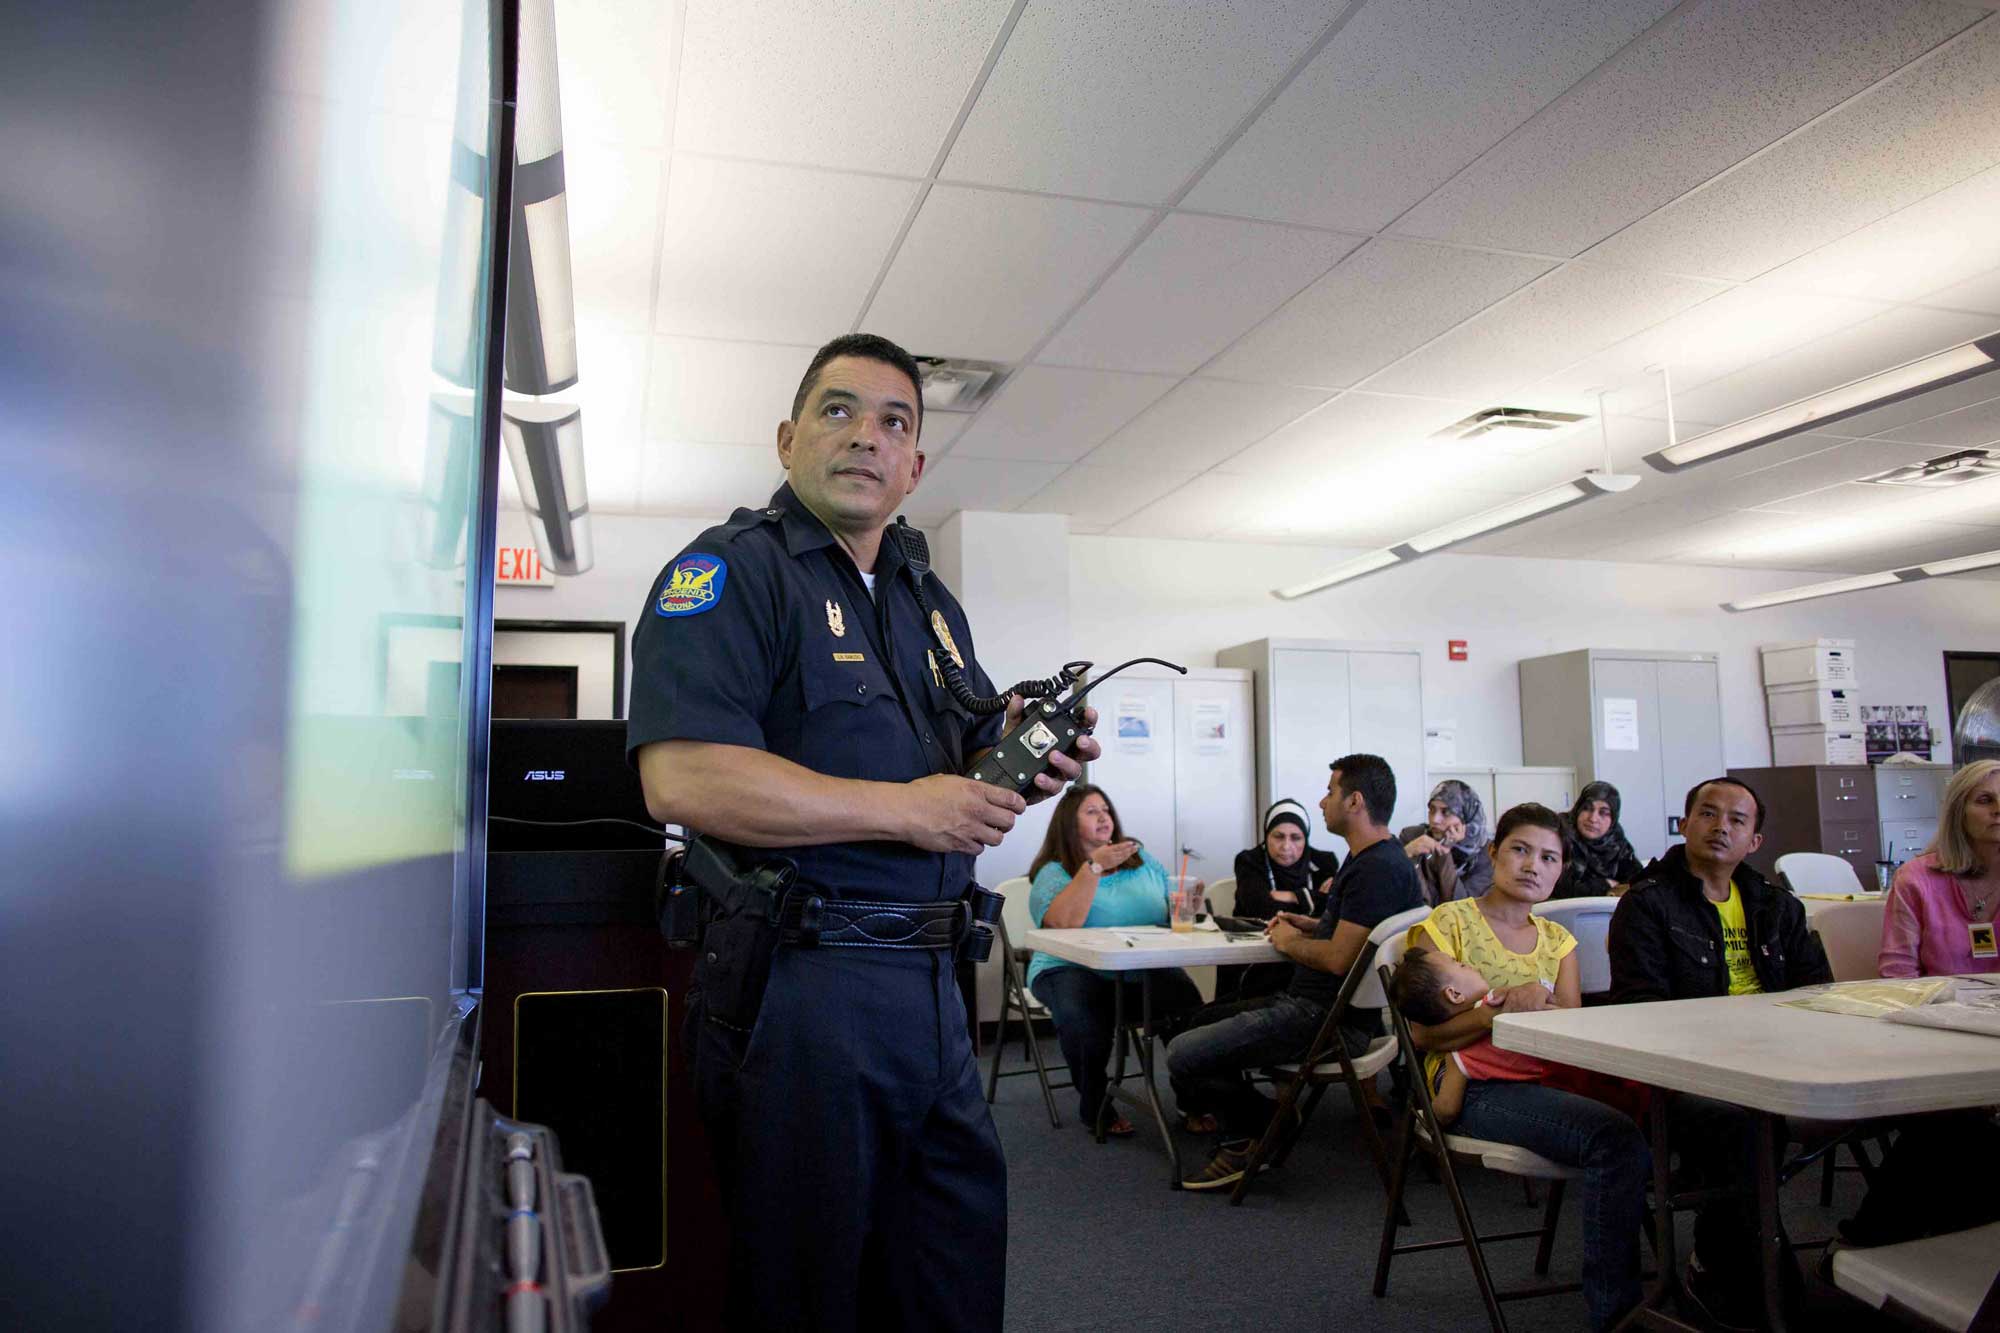 Police officer leading a refugee cultural adjustment class